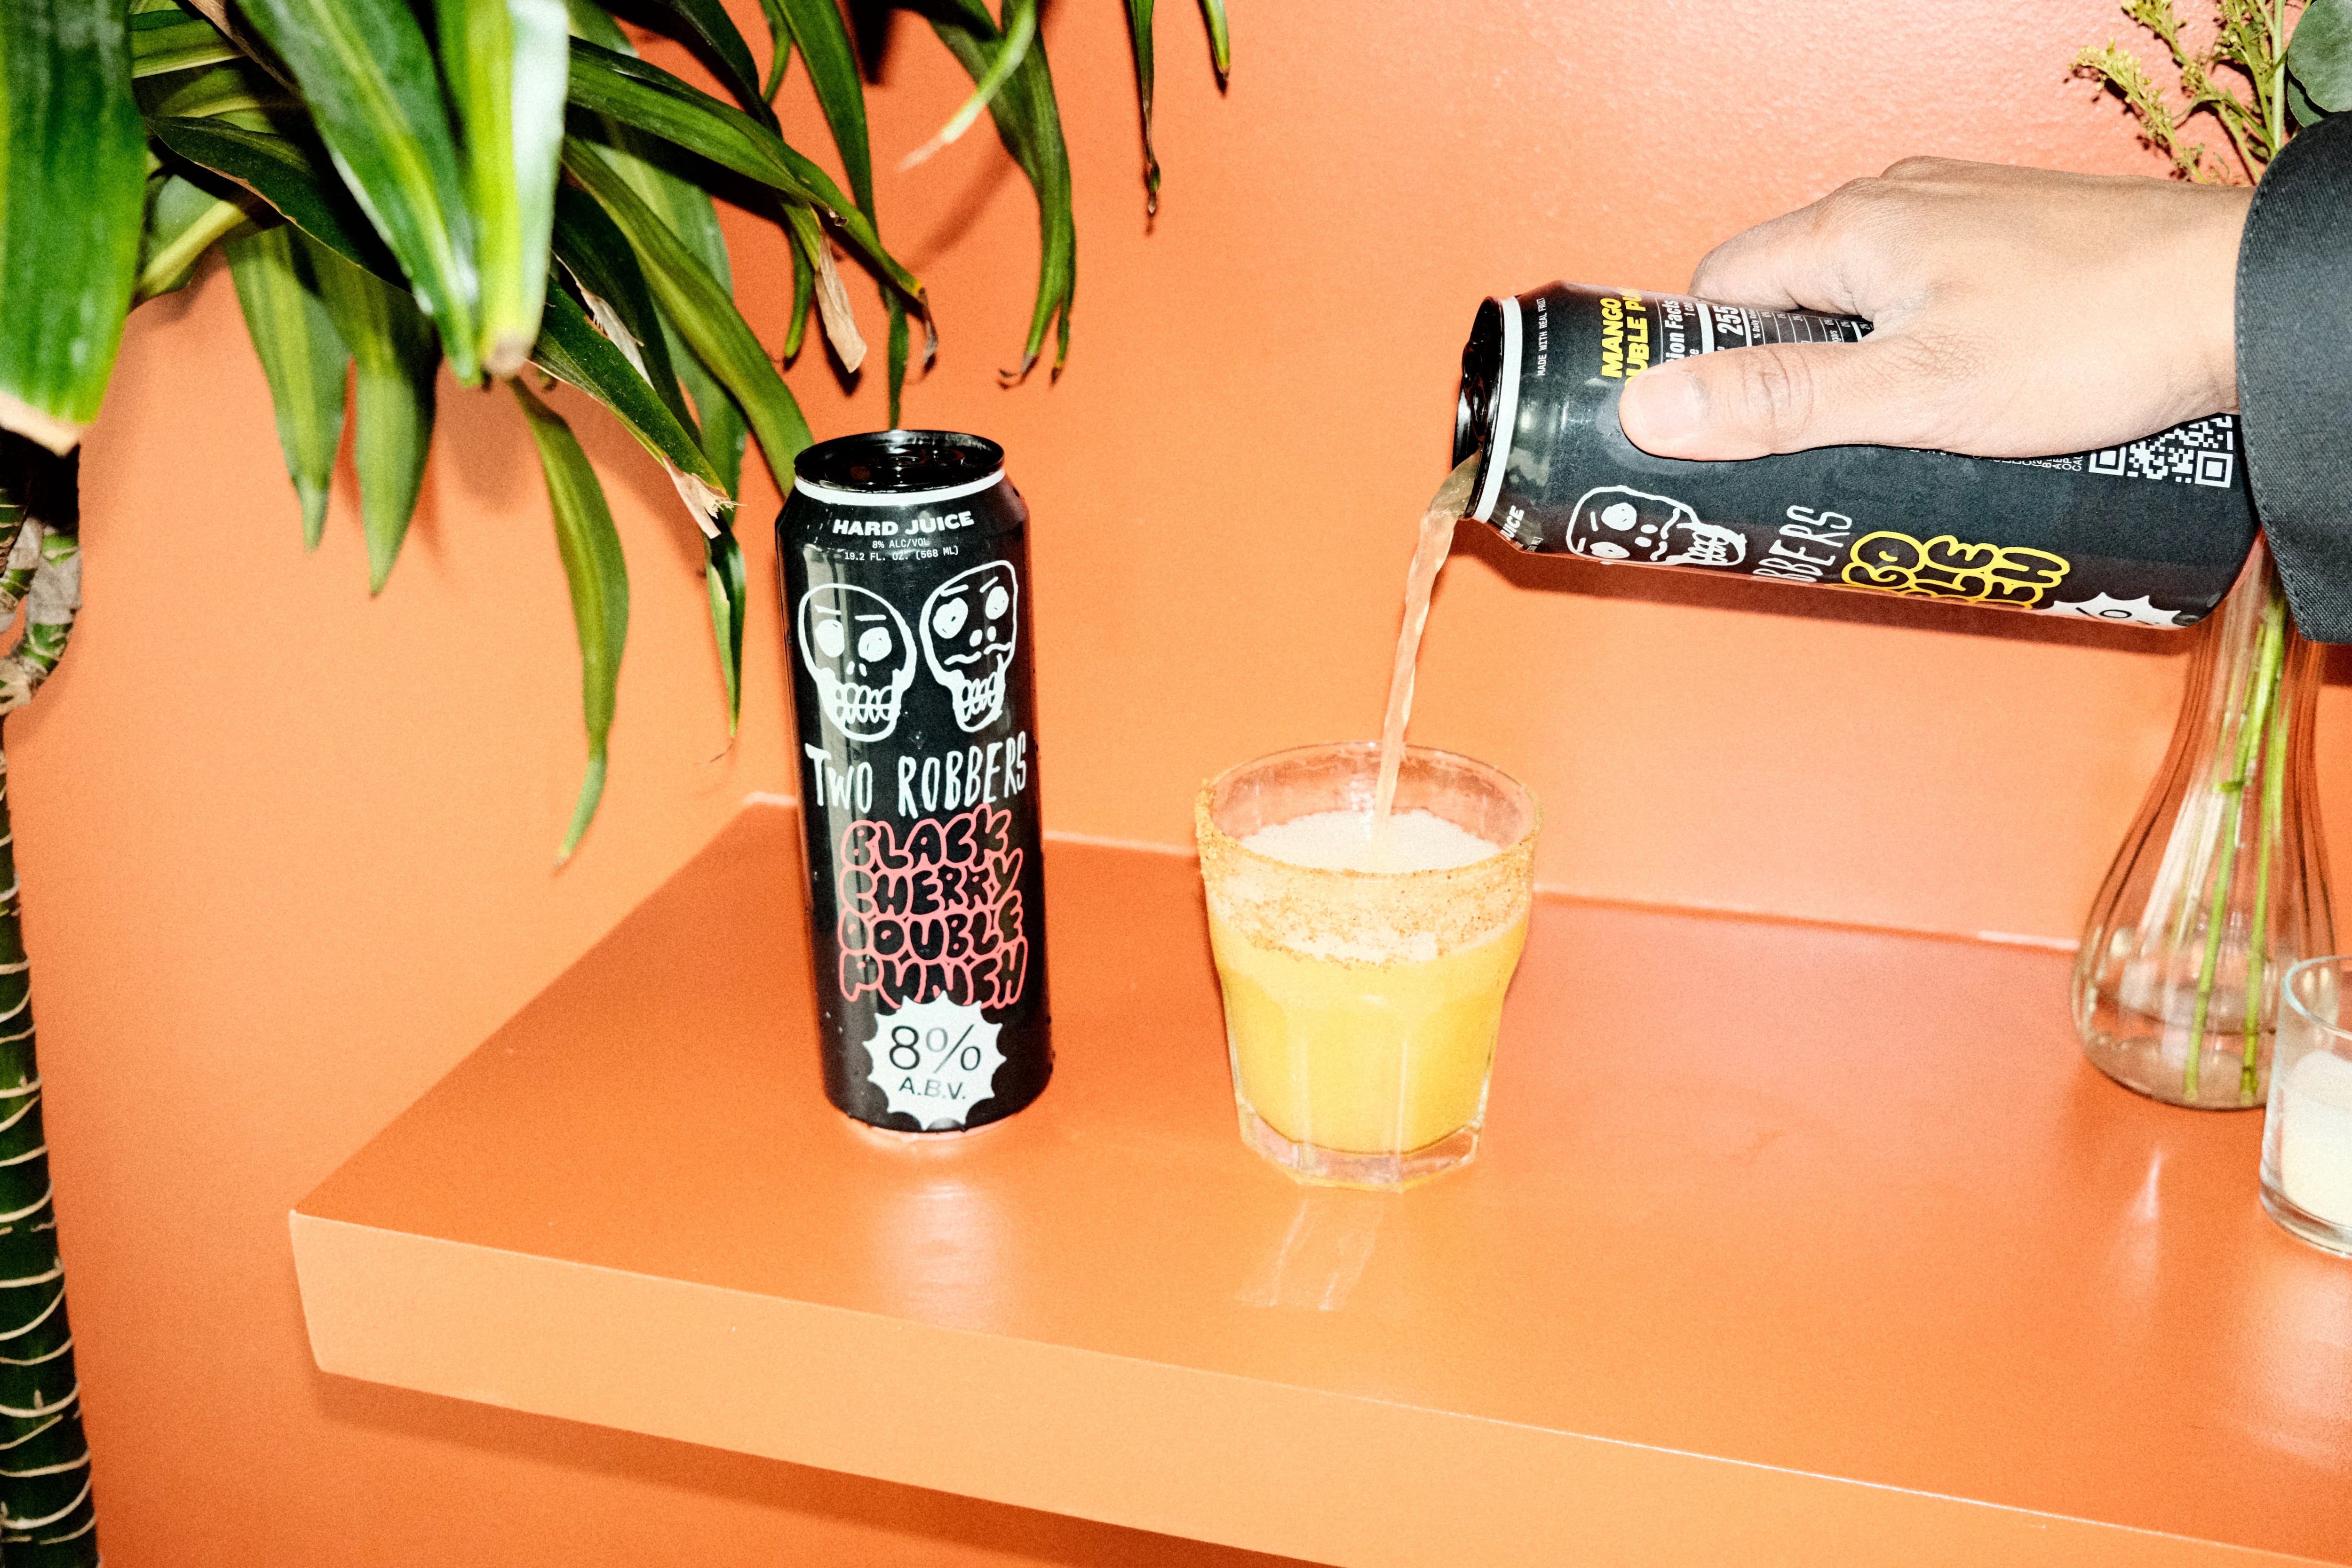 Two Robbers Double Punch Hard Juice is a new summer release from Two Robbers Seltzer in Fishtown and comes in mango and black cherry flavors.